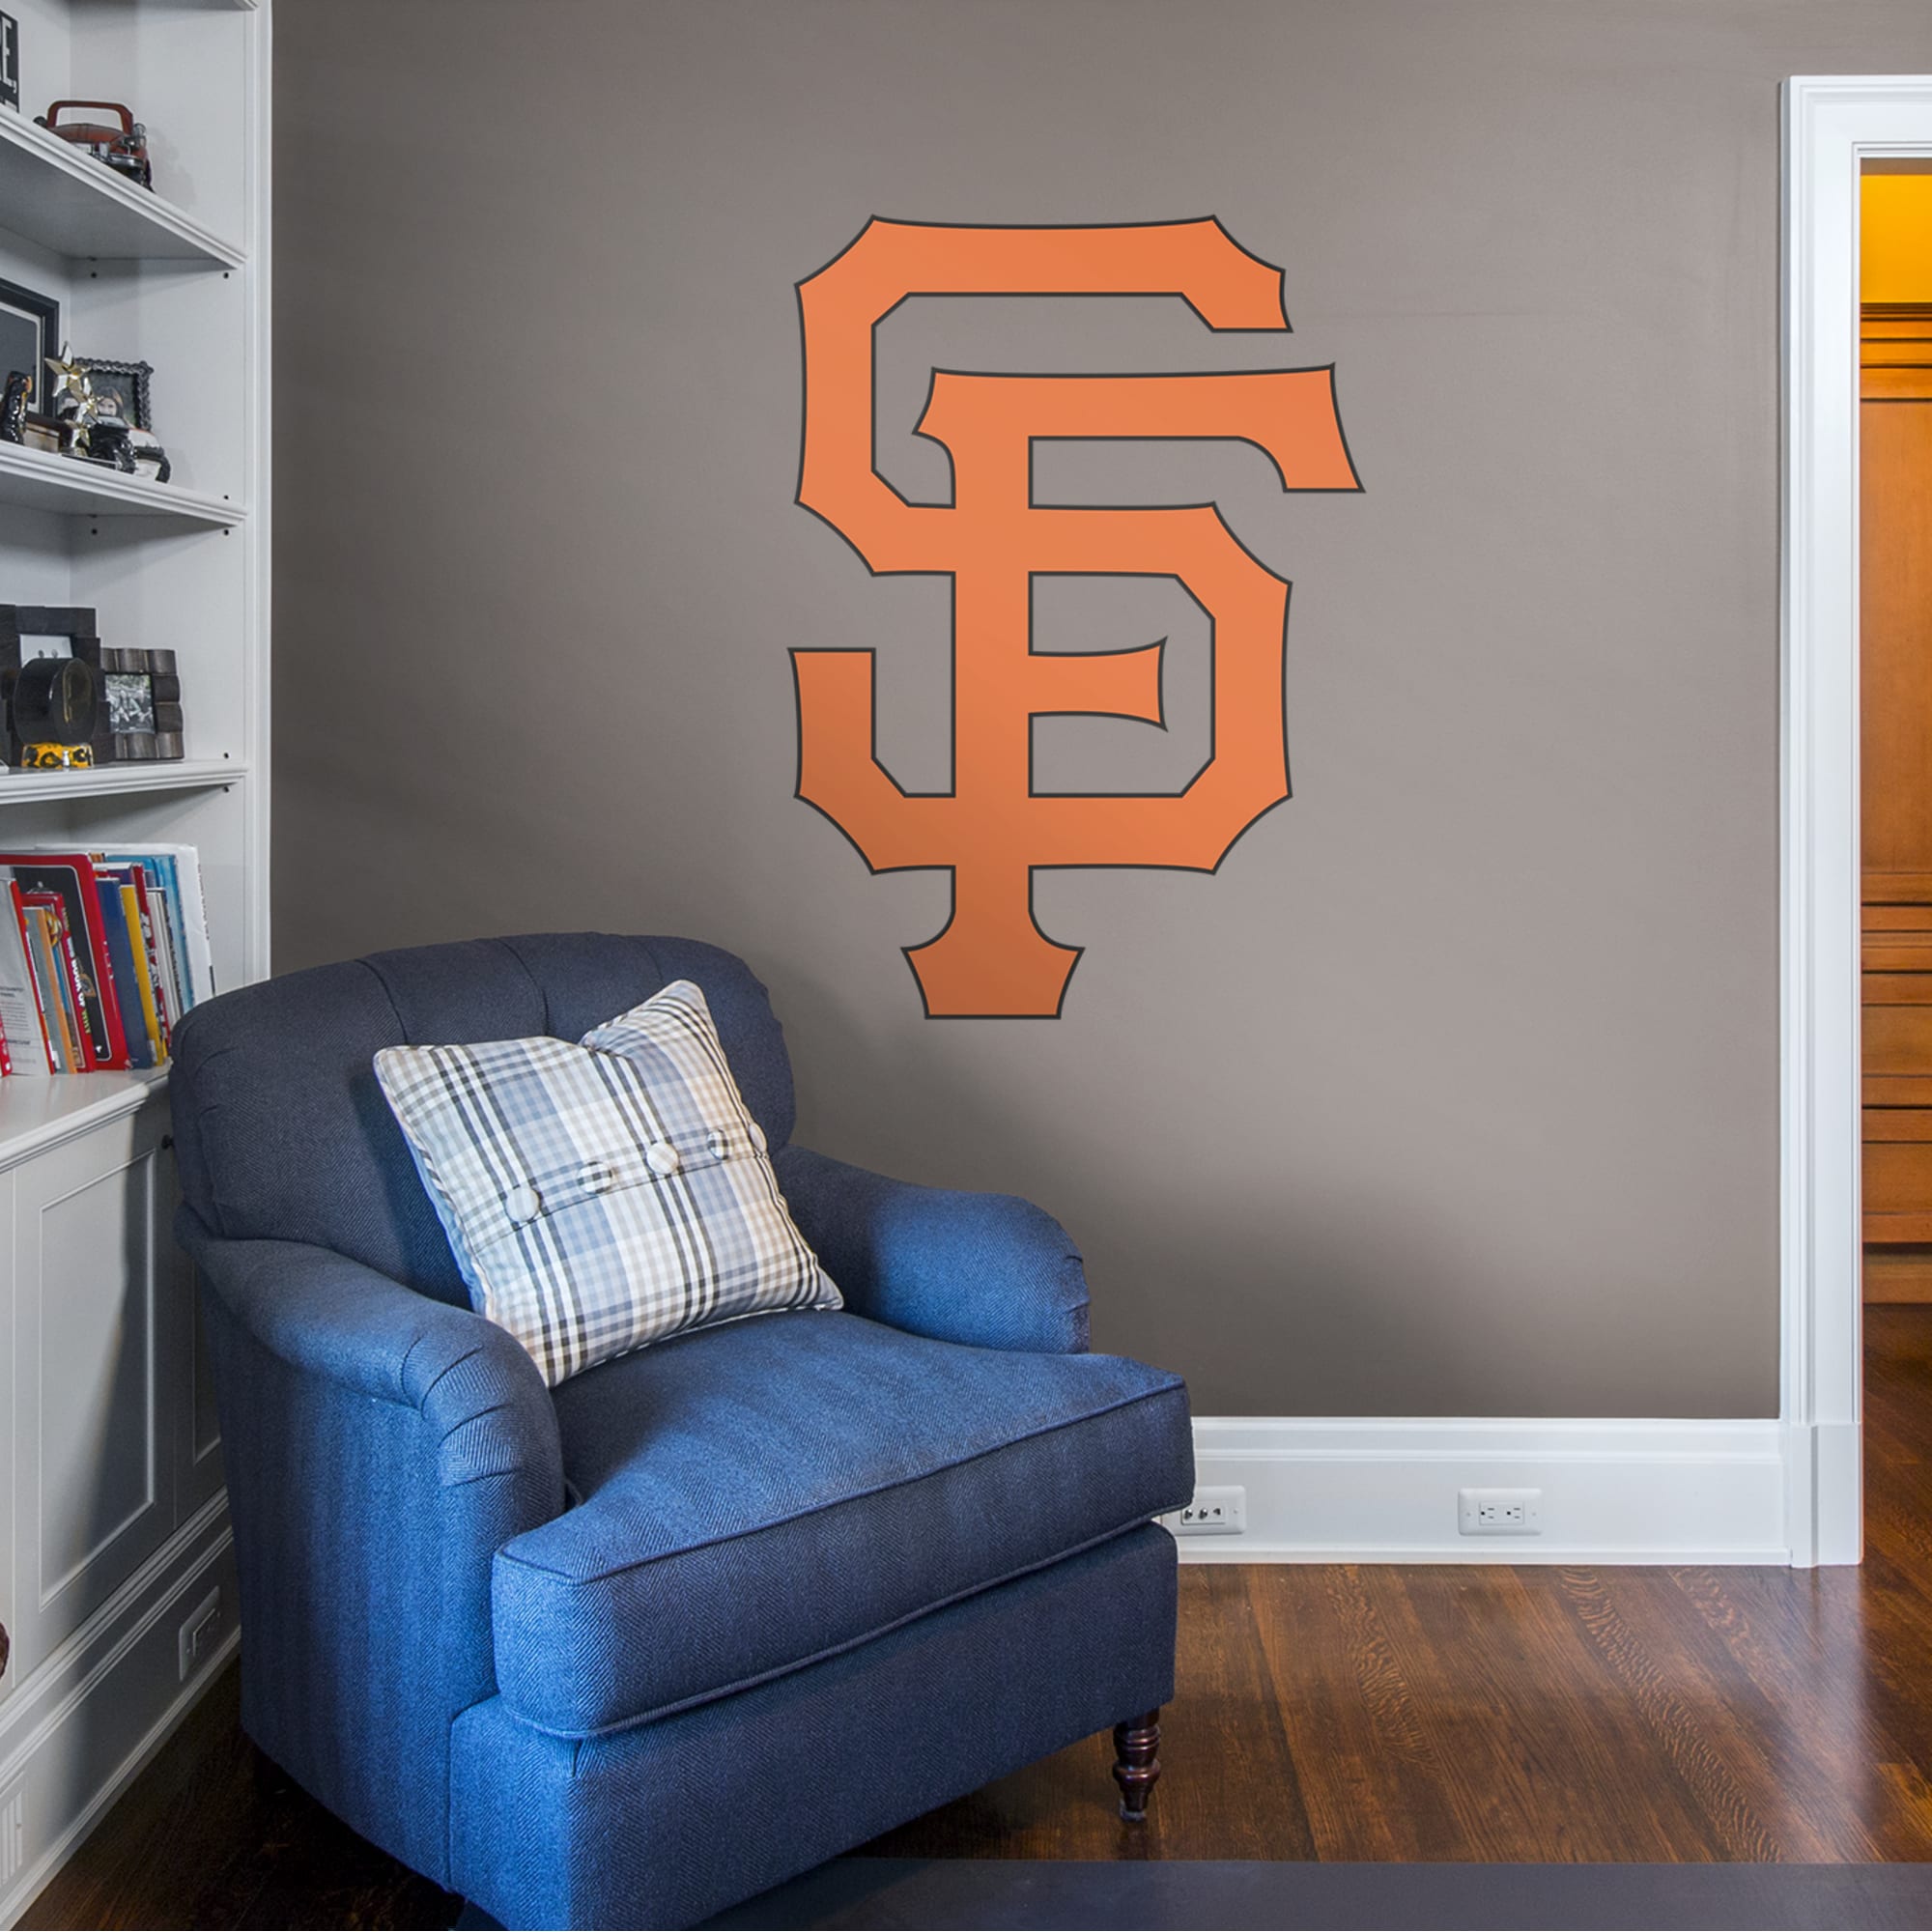 San Francisco Giants: Alternate Logo - Officially Licensed MLB Removable Wall Decal 39.0"W x 47.0"H by Fathead | Vinyl